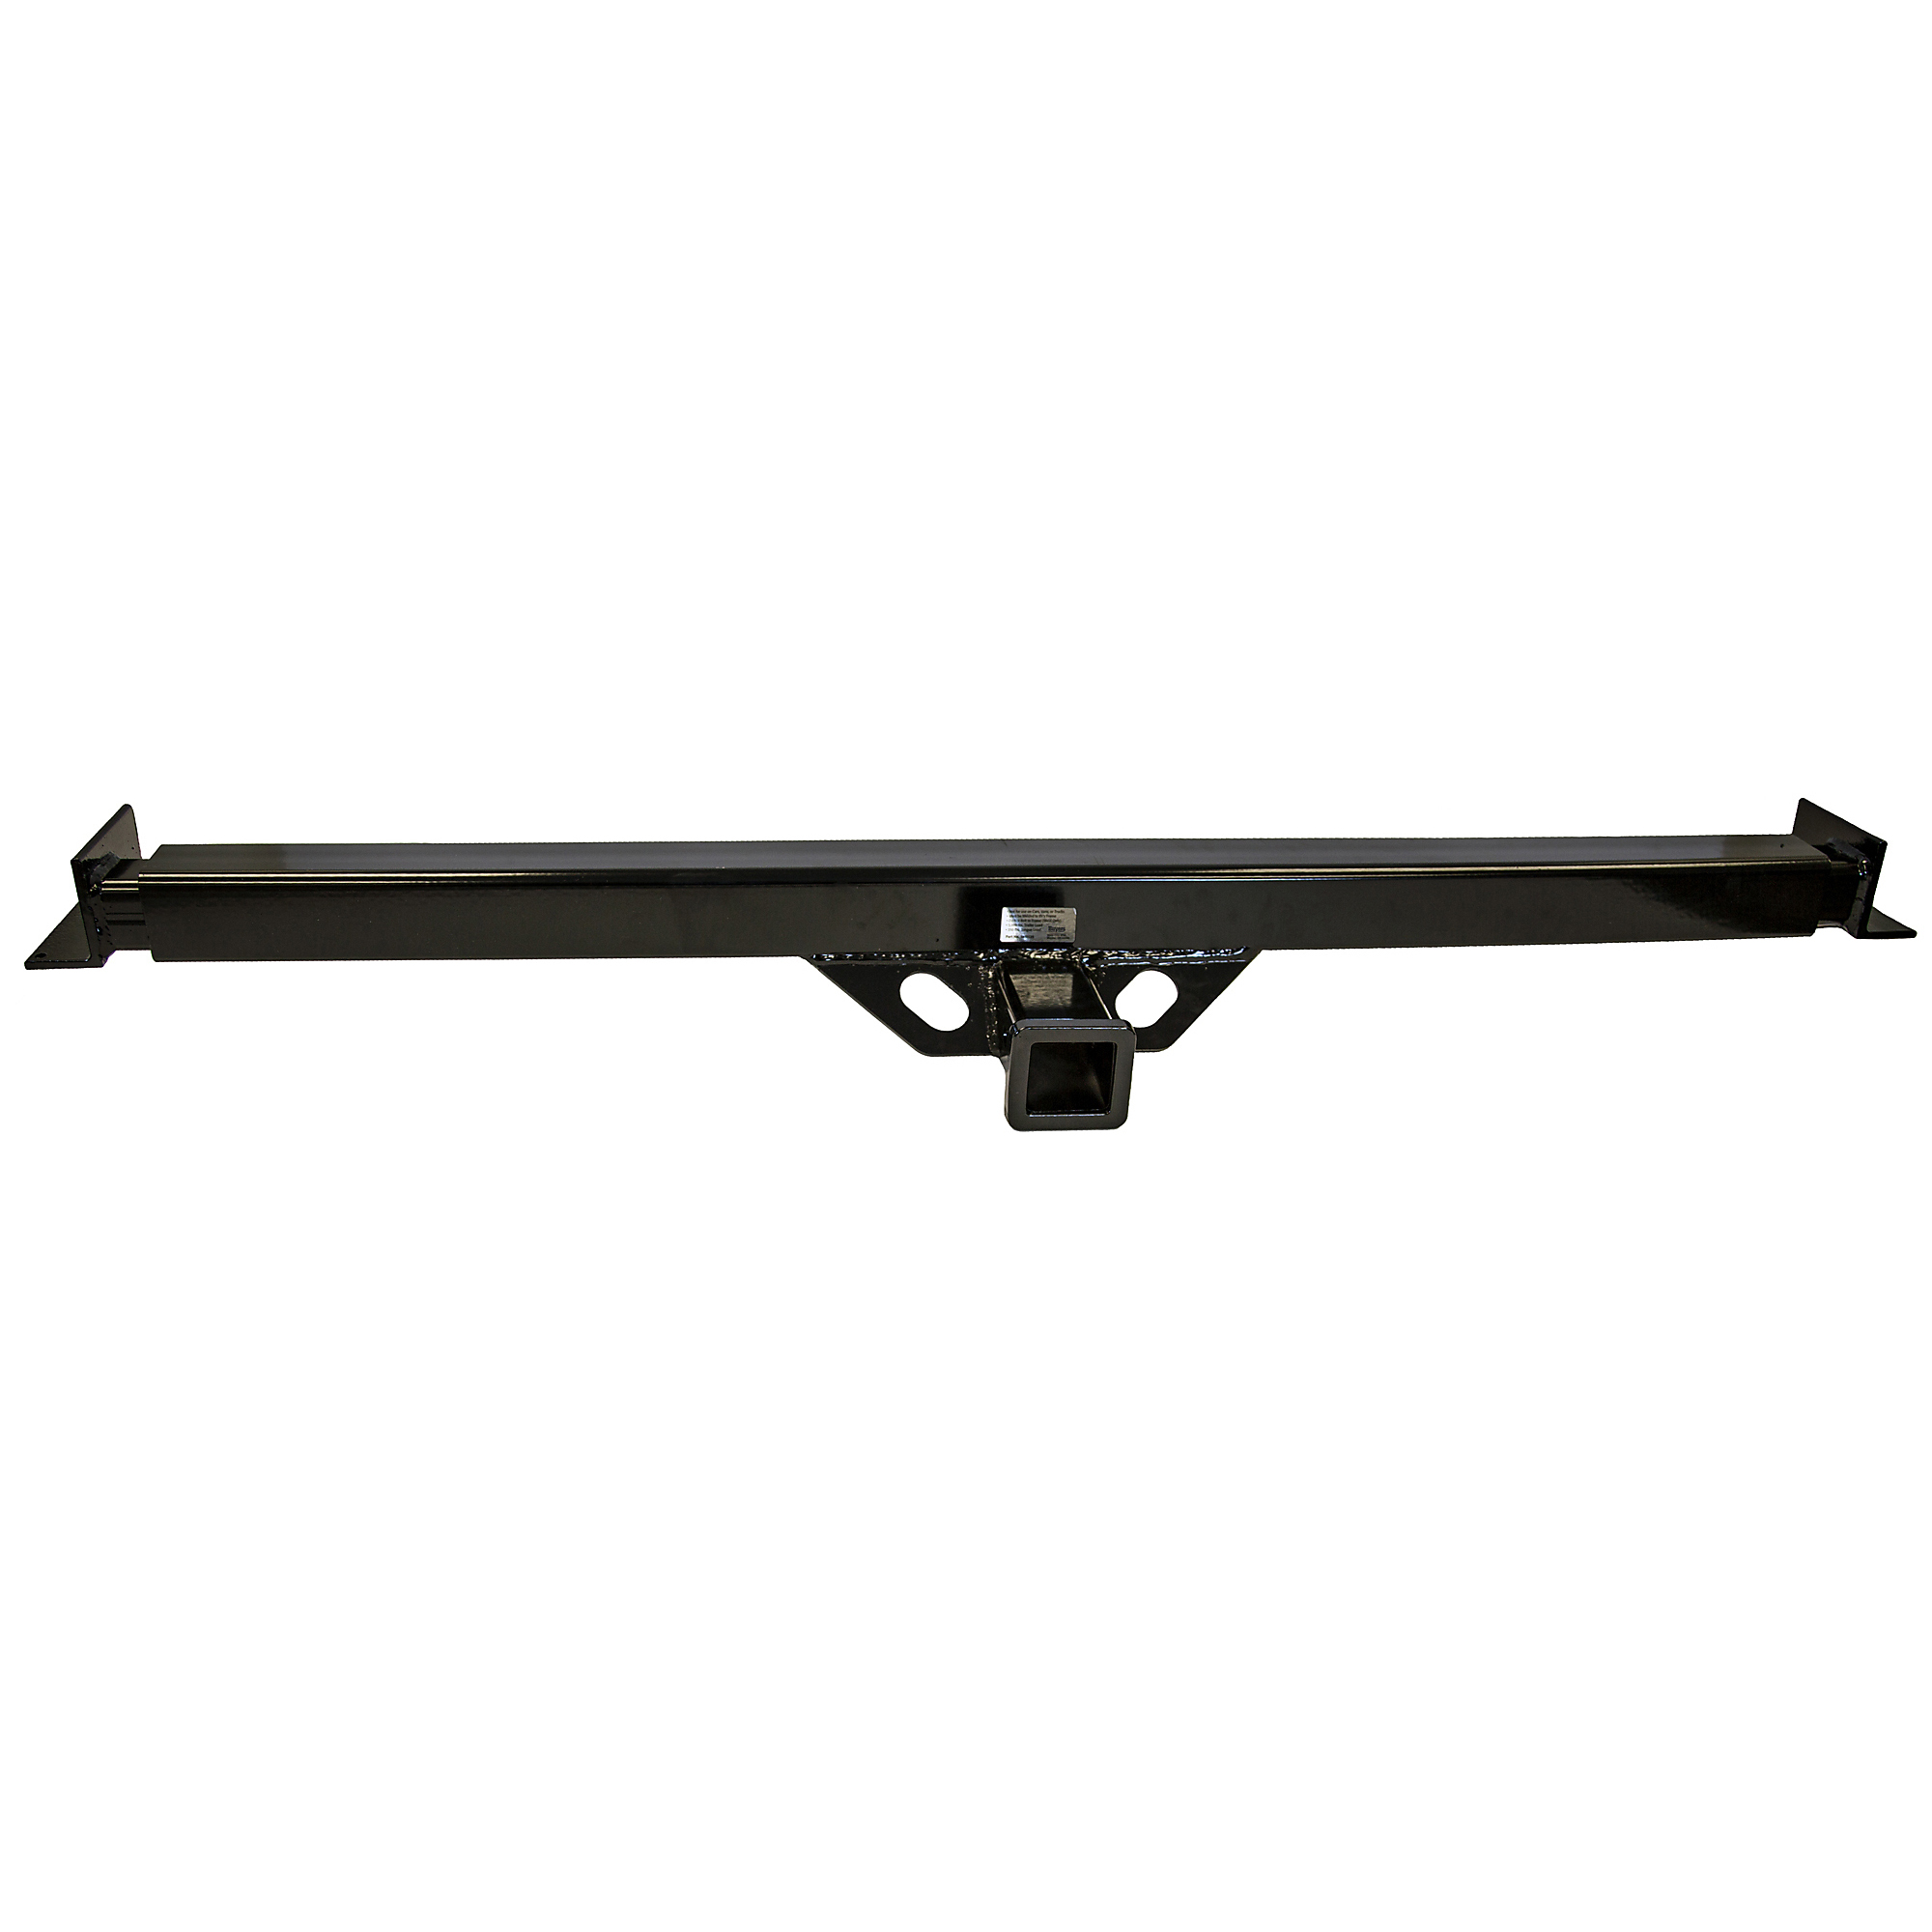 Buyers Products Trailer Accessory Receiver, Carbon Steel, 3,000lb. Capacity Model 1801125